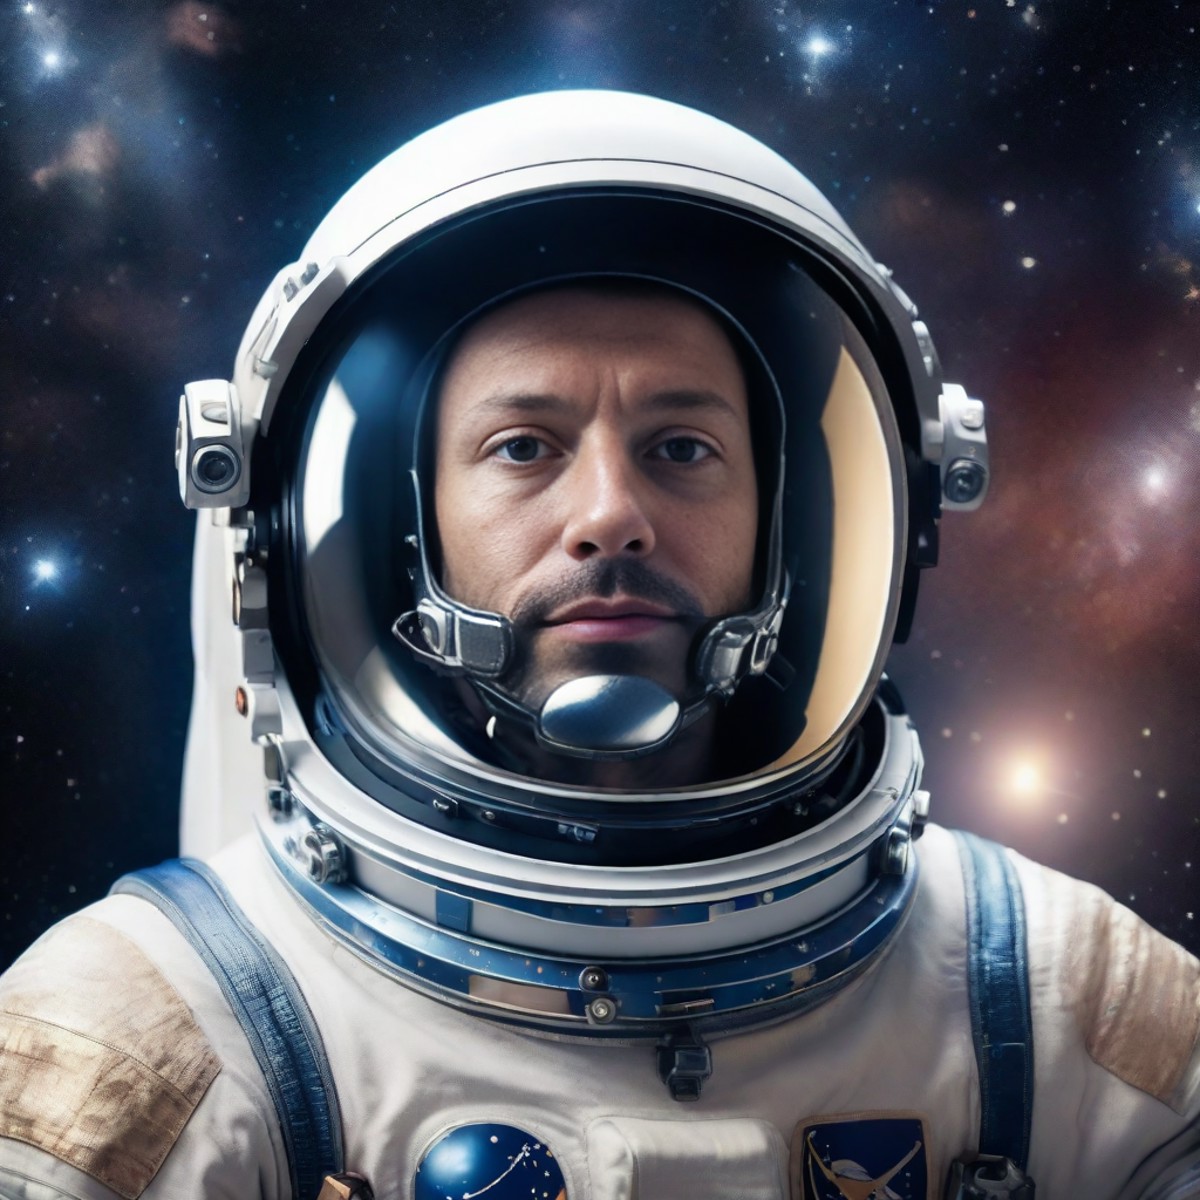 Renaissance-style portrait of an astronaut in space, detailed starry background, reflective helmet, 8k, hdr